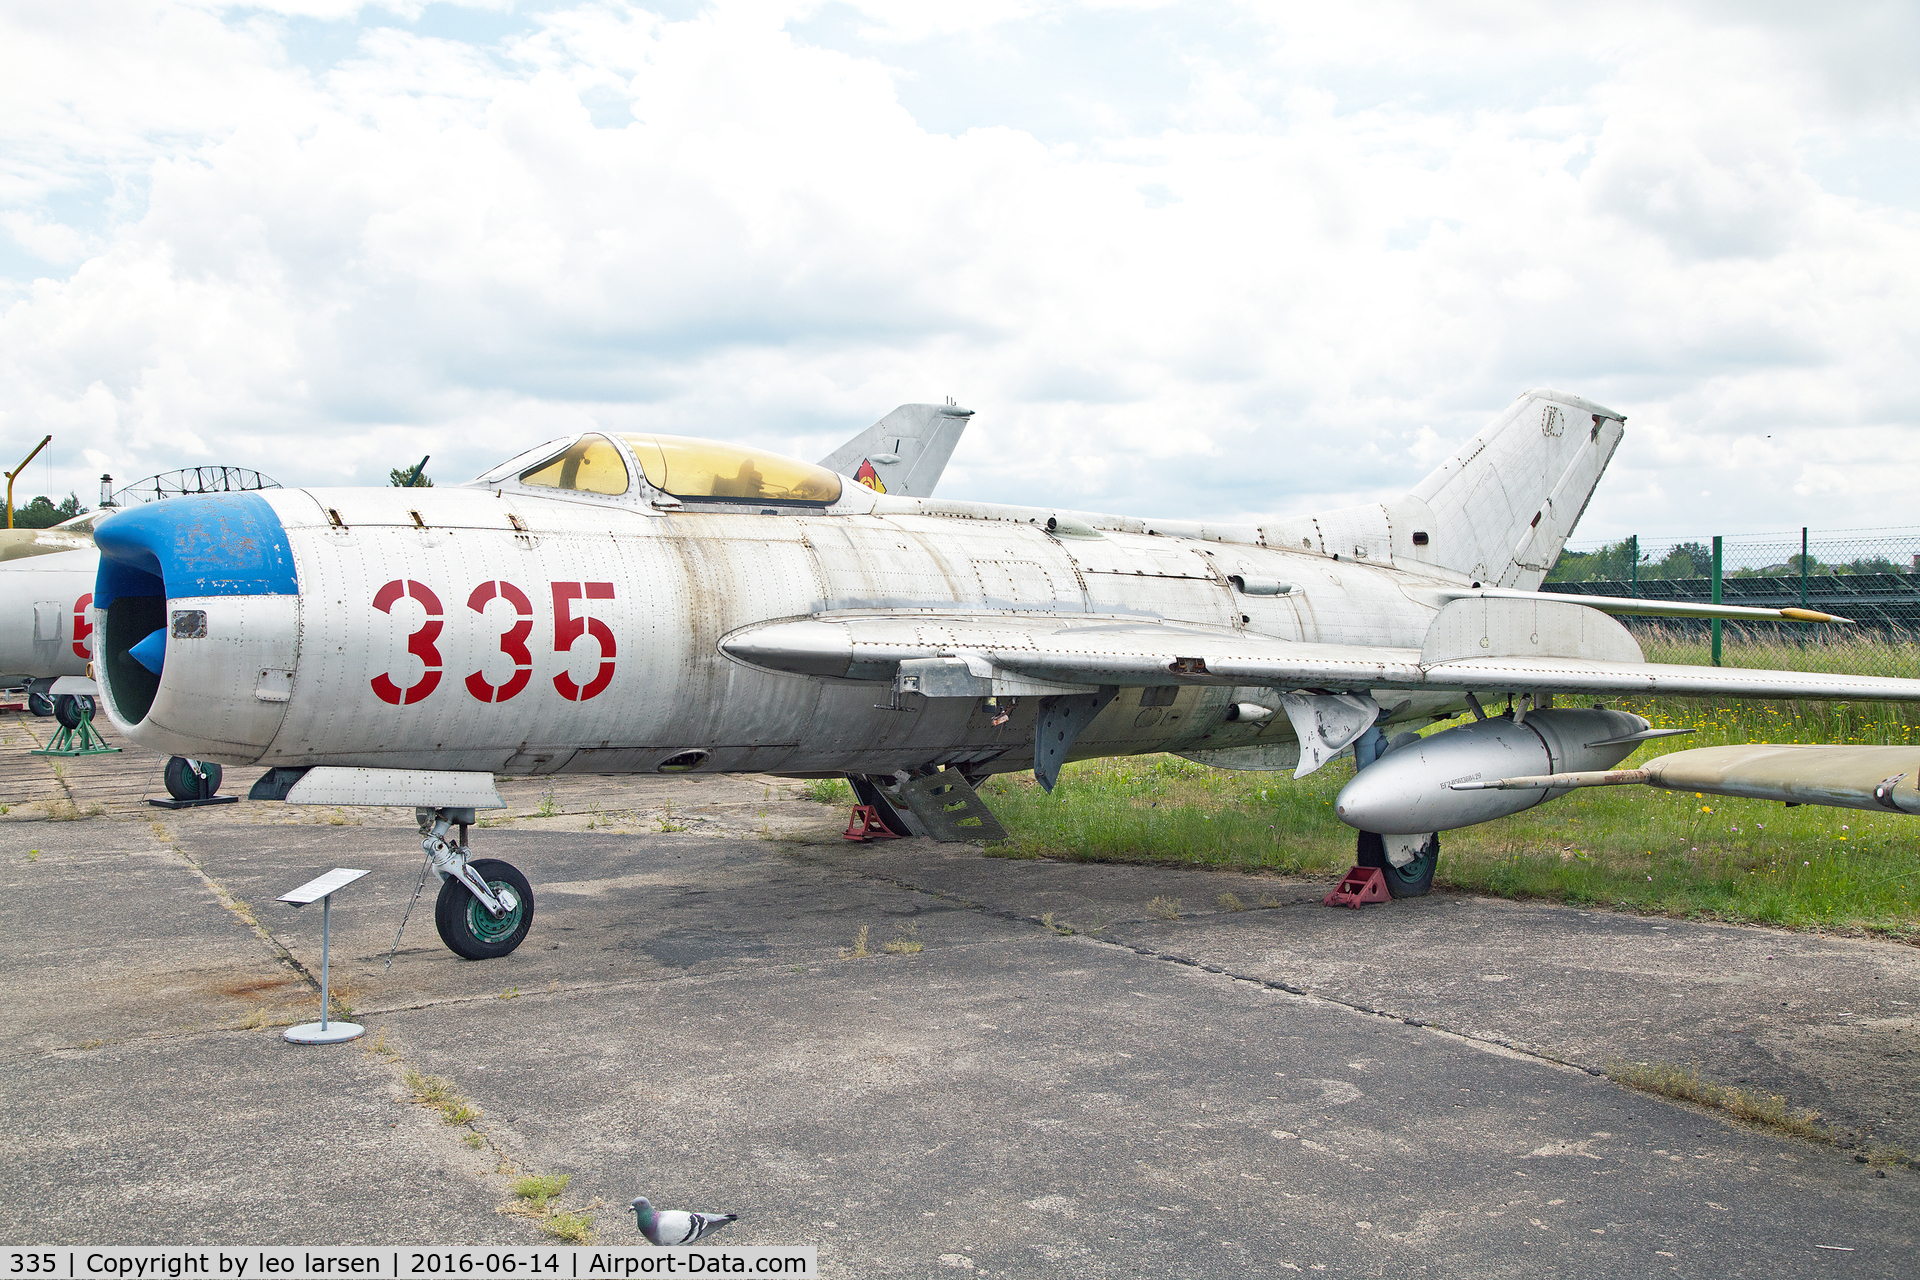 335, 1957 Mikoyan-Gurevich MiG-19PM C/N 650 929, Rothenburg museum 14.6.2016 now in all metal finish